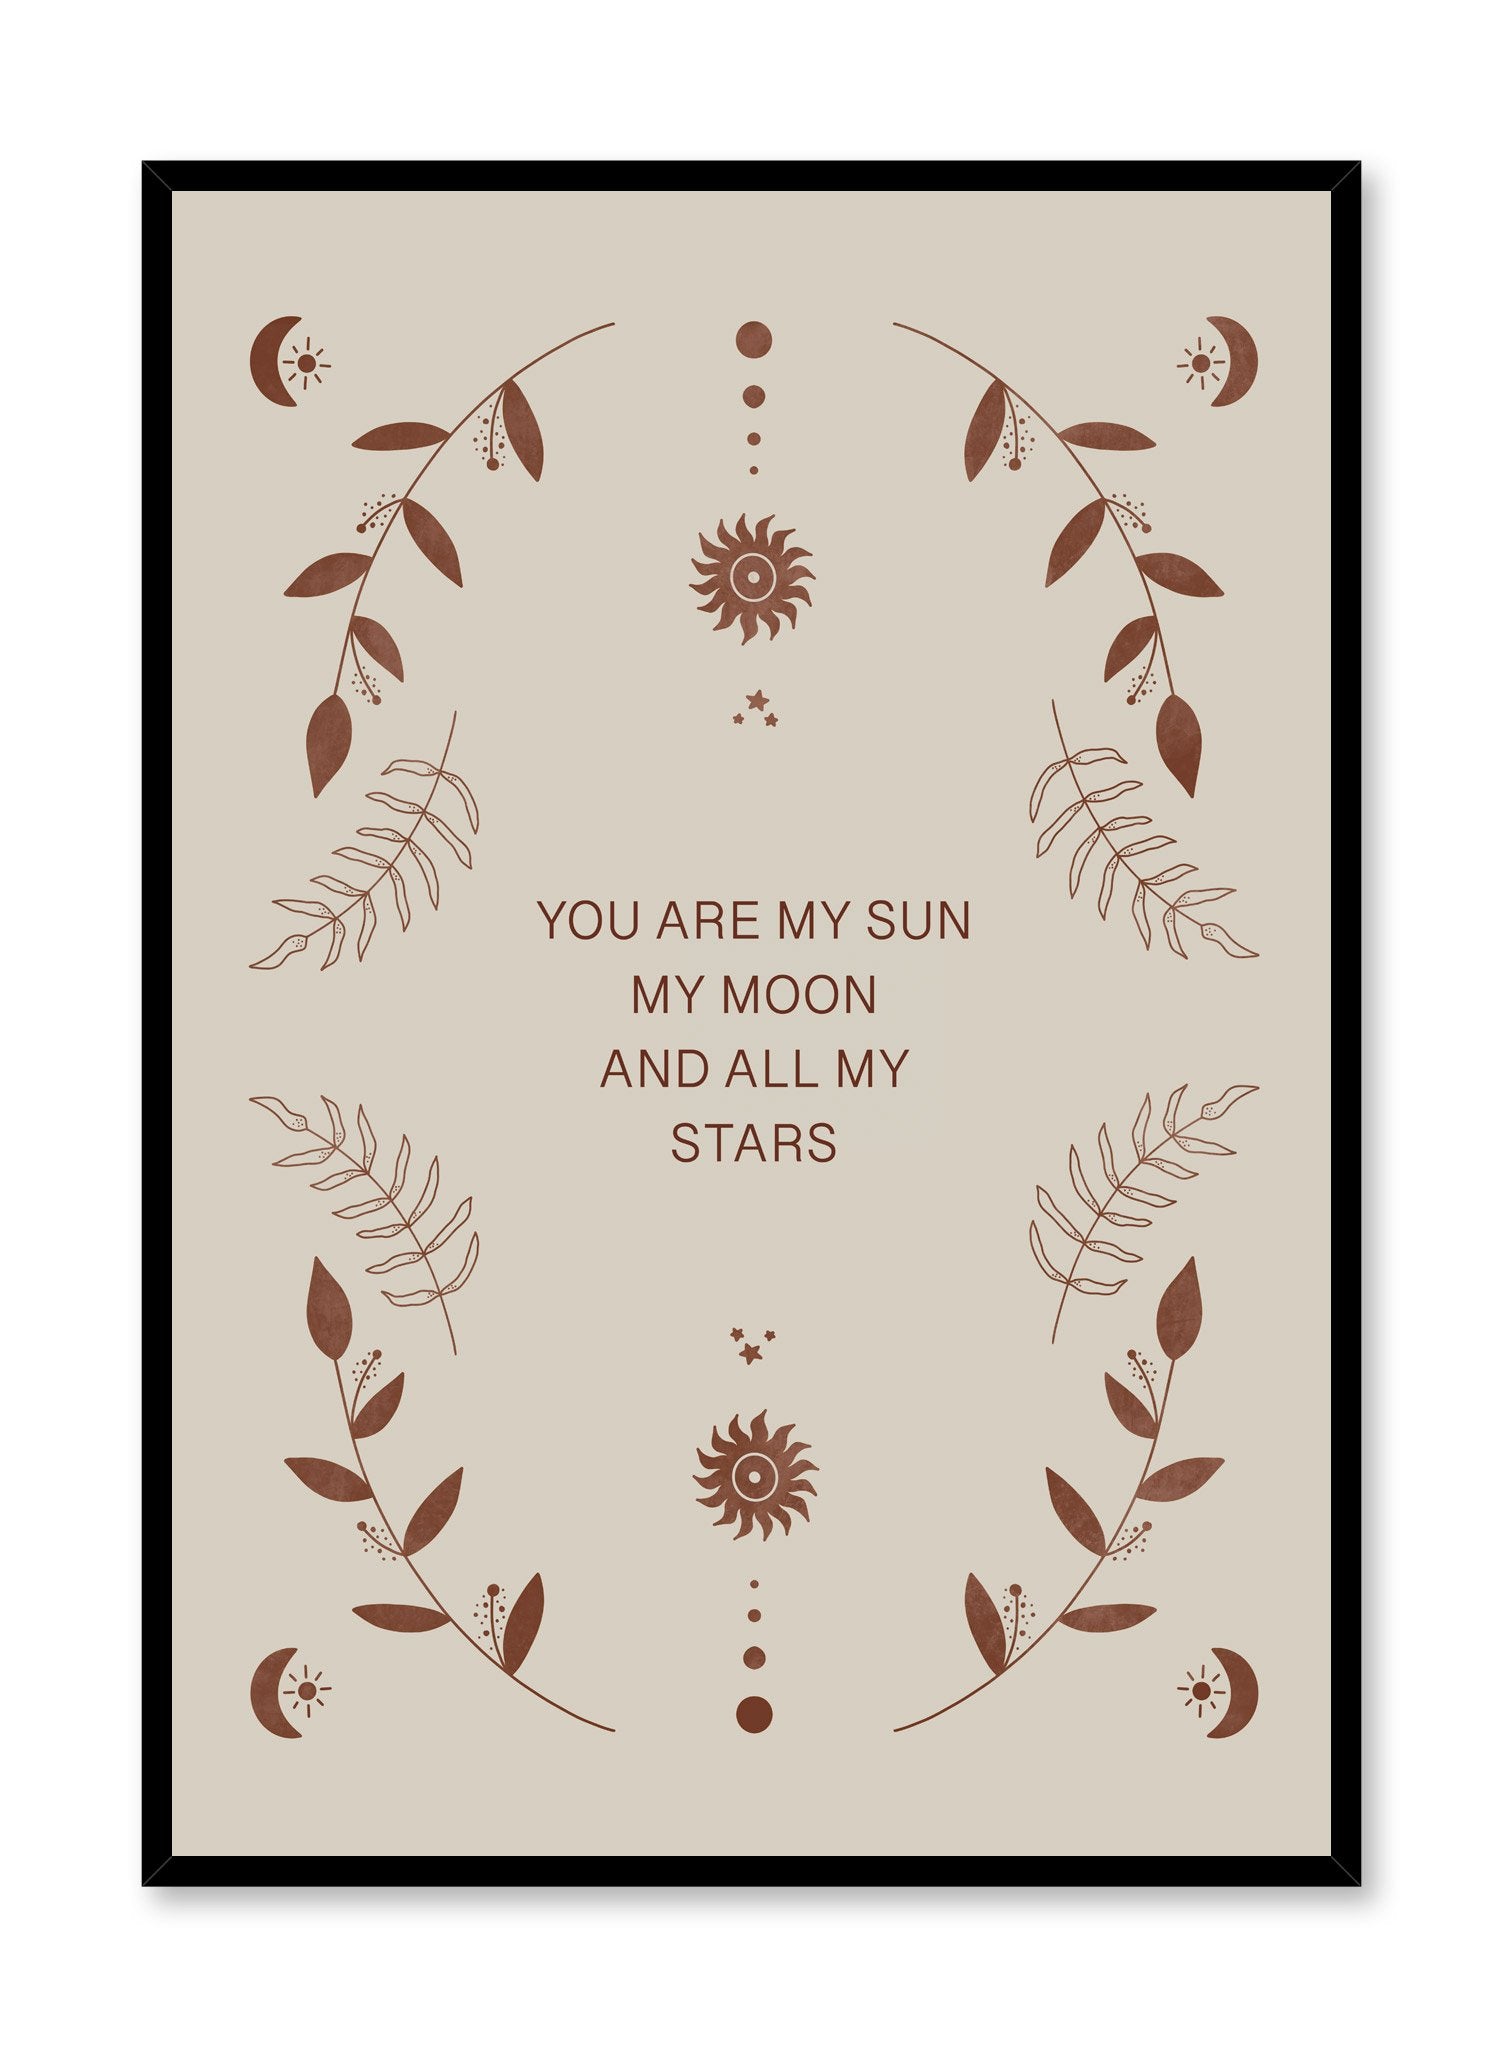 Celestial typography poster by Opposite Wall with Celestial Love quote